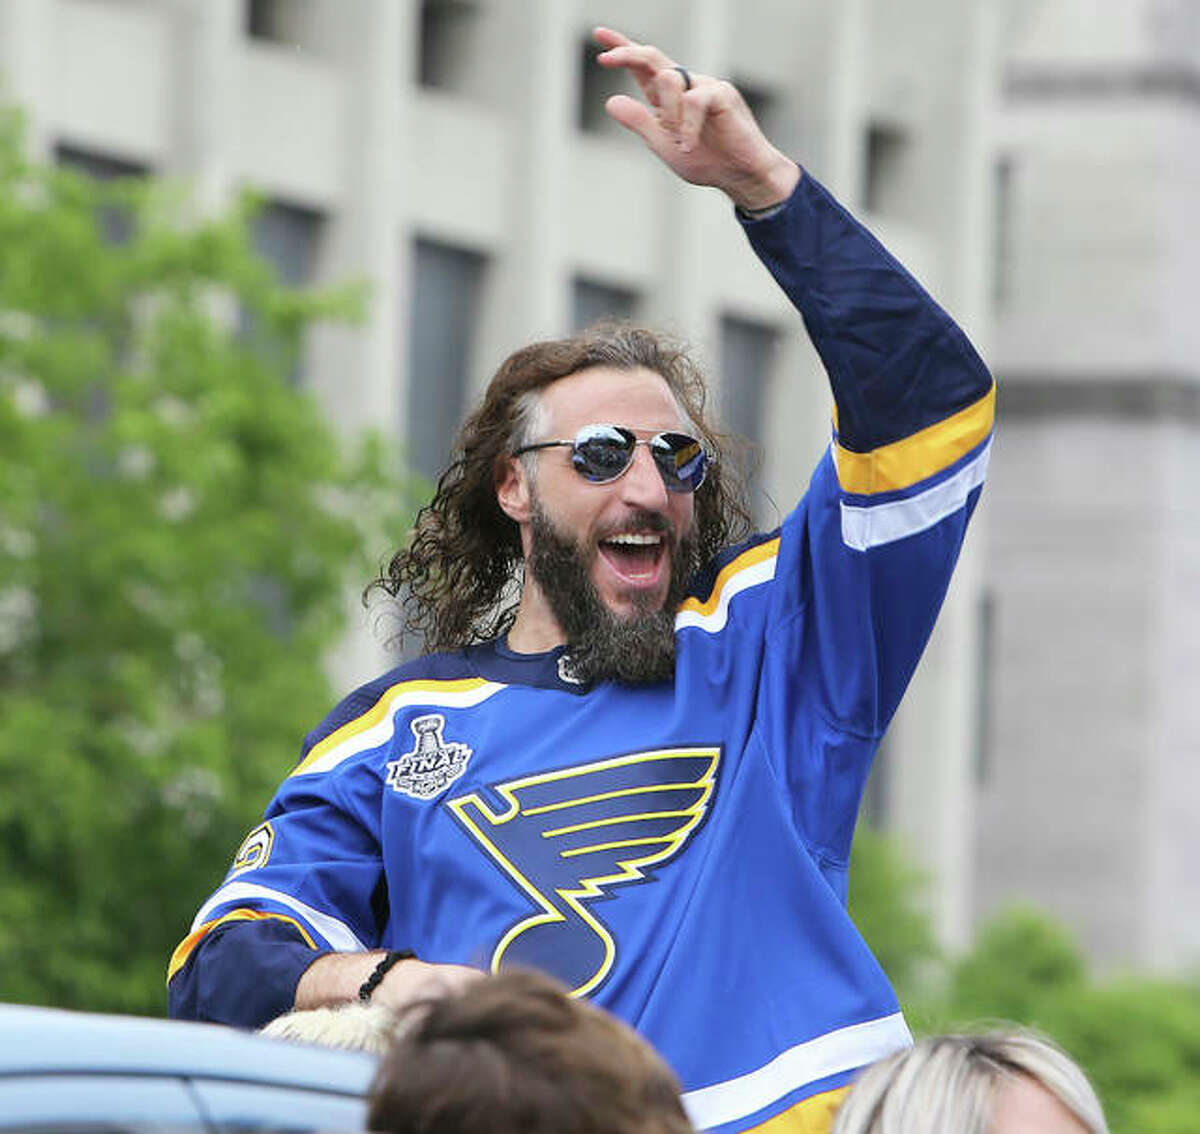 St. Louis Blues player Chris Thorburn waves to fans during the NHL Stanley Cup victory parade June 15, 2019 in St. Louis. Thorburn announced his retirement last month, but the Blues will resume the season on Aug. 2.